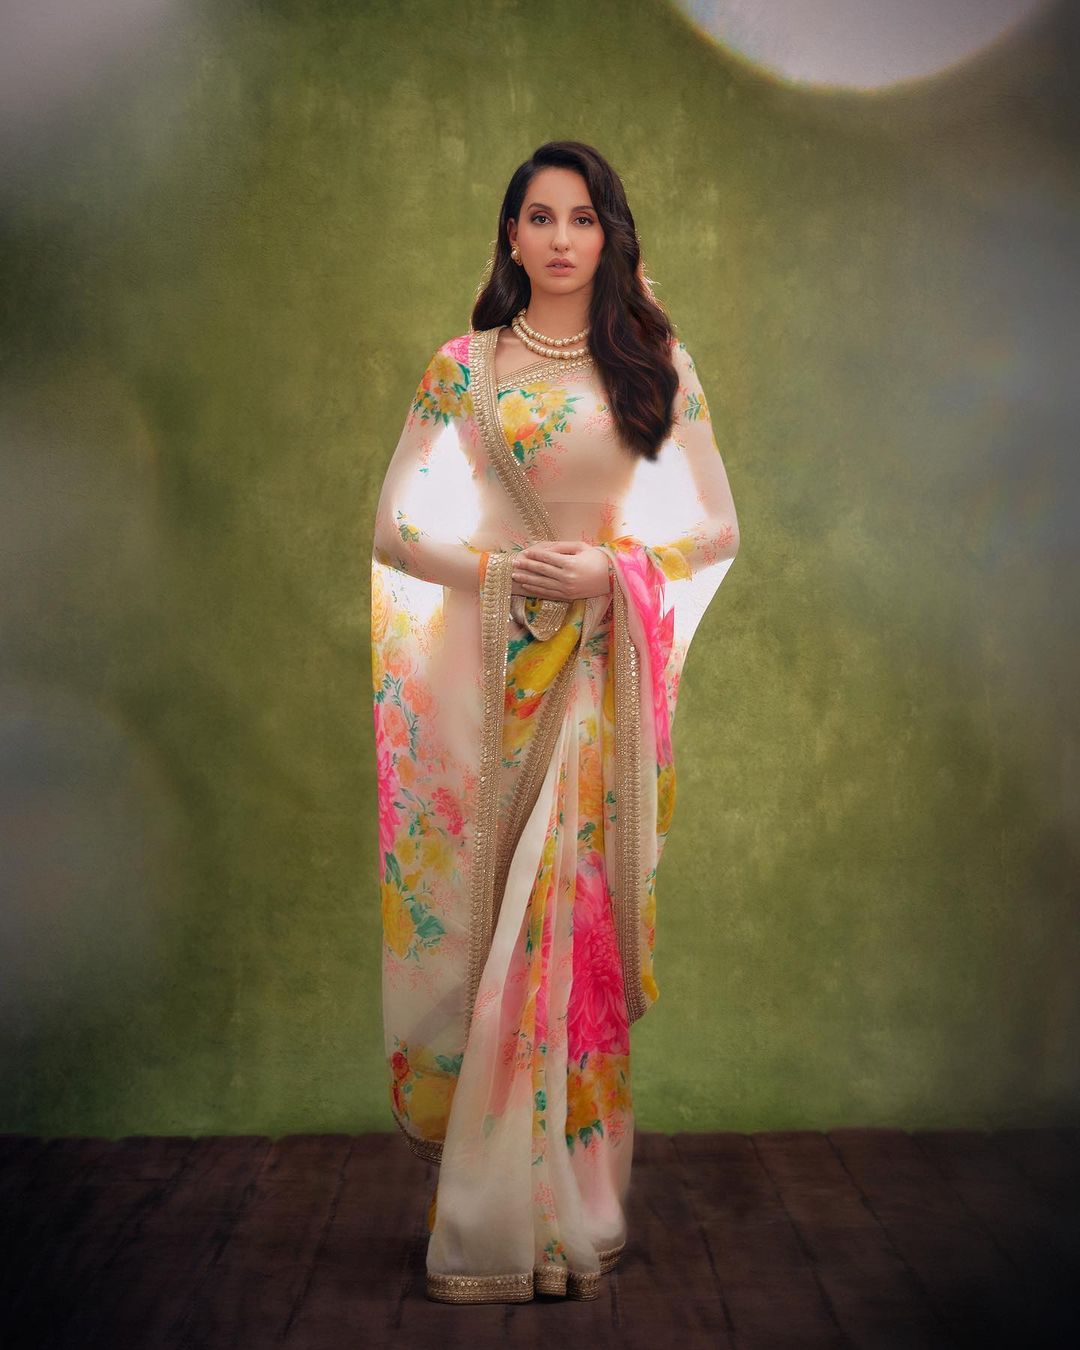  Nora Fatehi paints a picture of elegance in the floral-printed saree. (Image: Instagram)